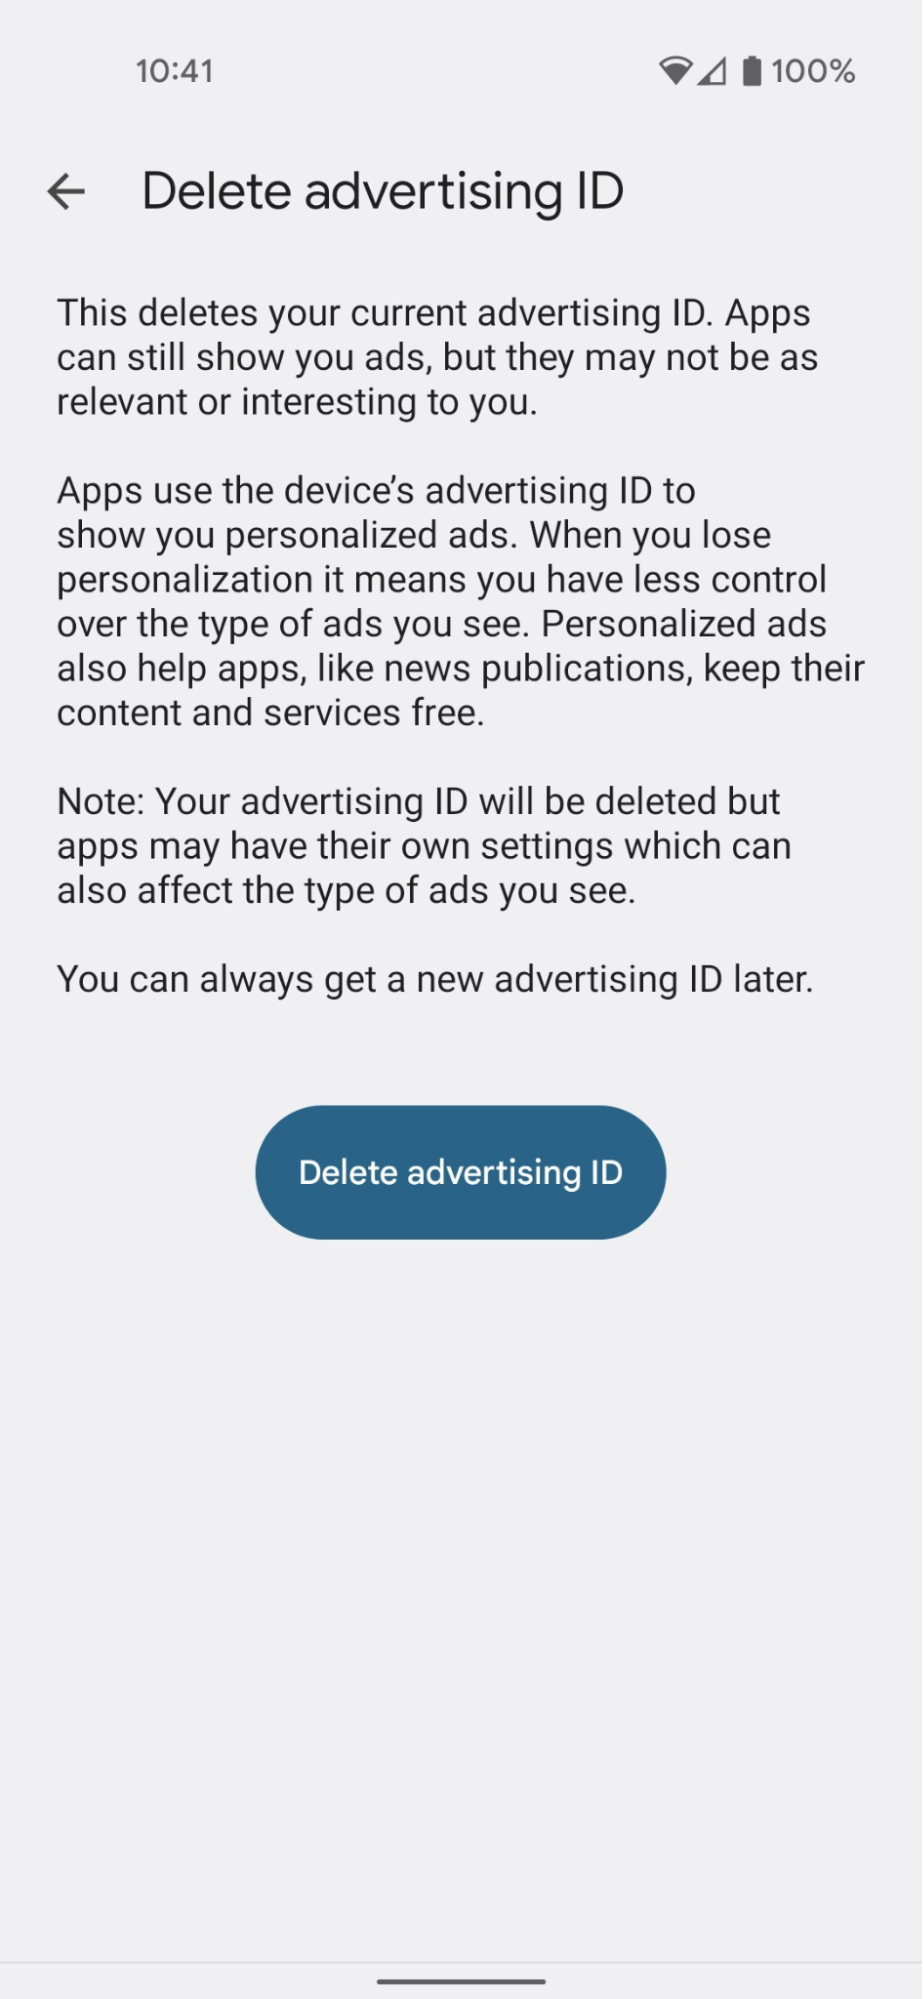 A screenshot of the Android Delete Advertising ID page. This page allows you to choose to delete the advertising ID.